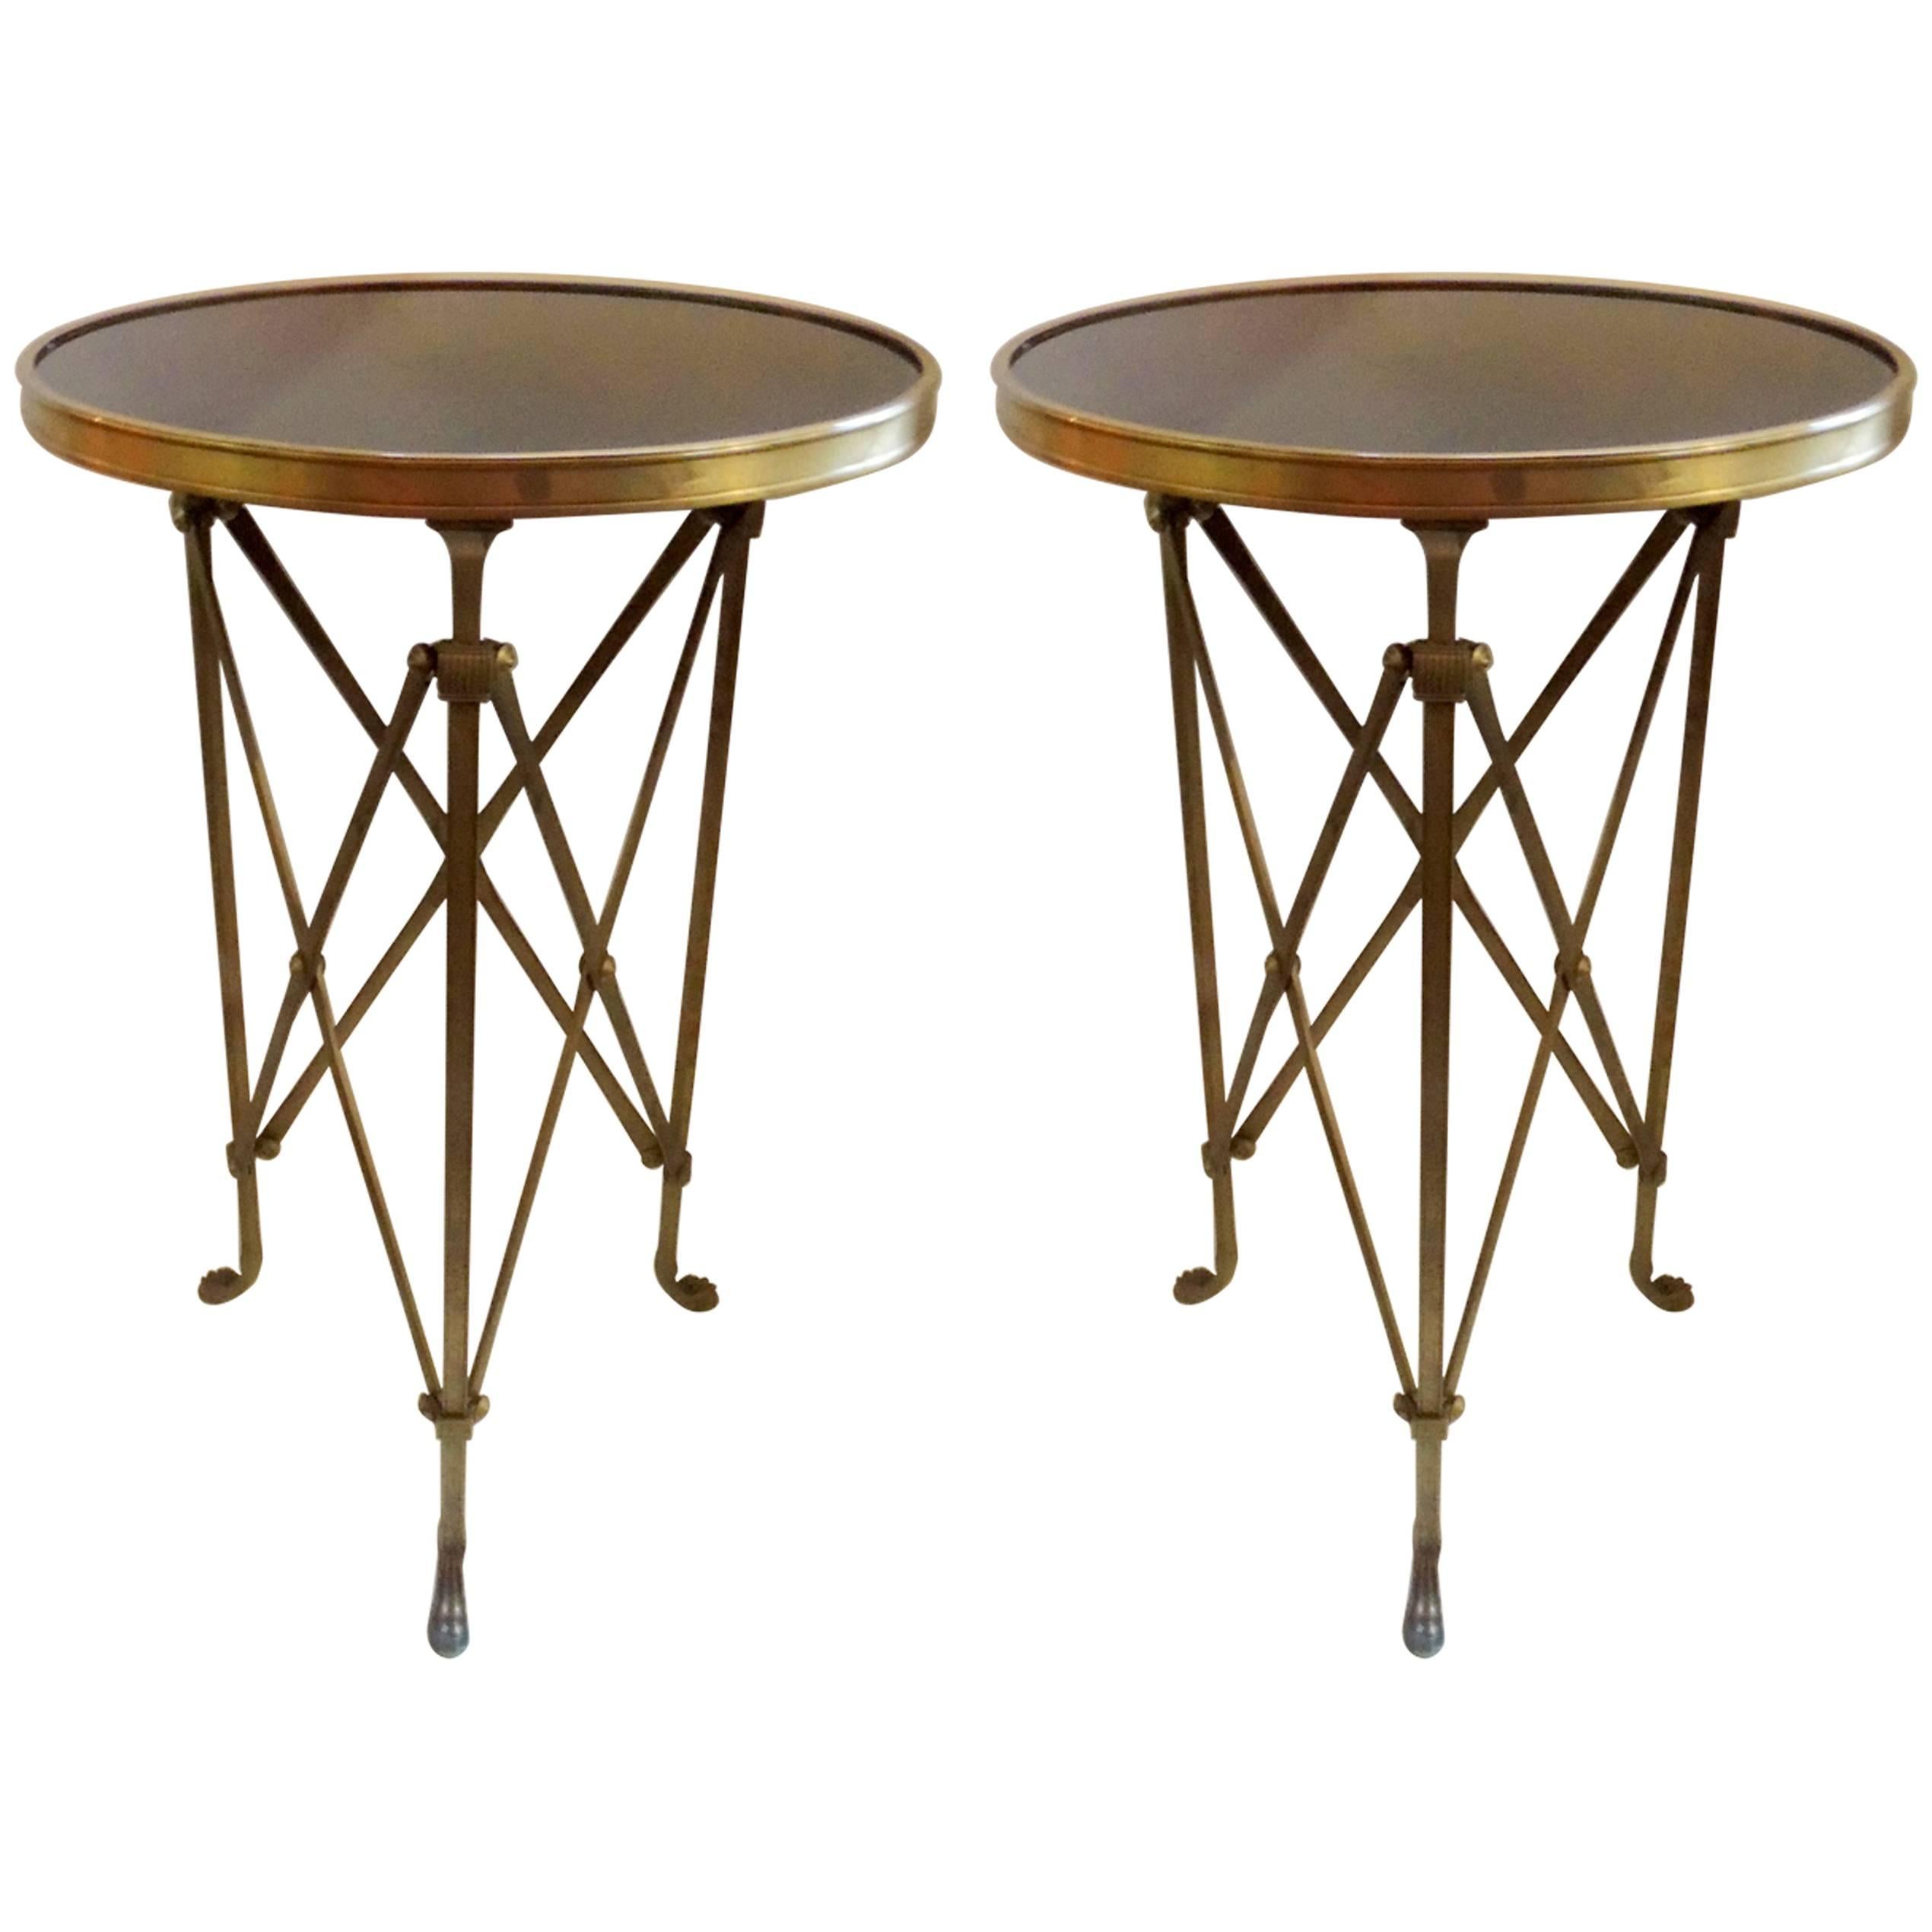 Neoclassical Pair French Bronze Granite Round Regency Gueridon Tables Paw Feet